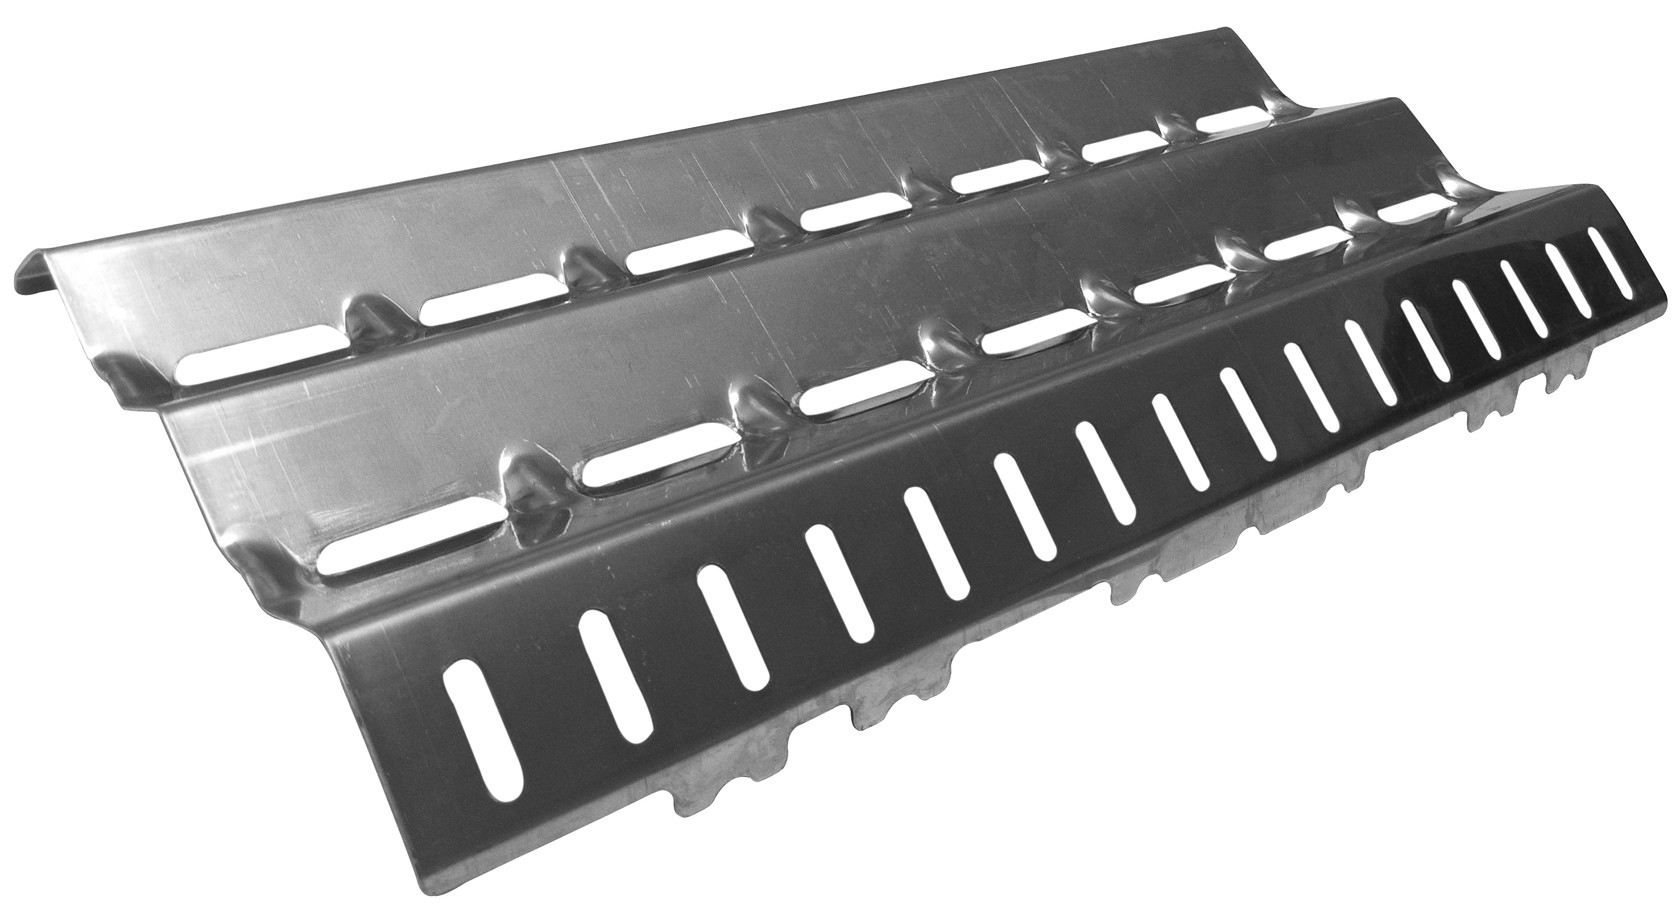 16-9/16” X 9"  Stainless Steel Heat Plate